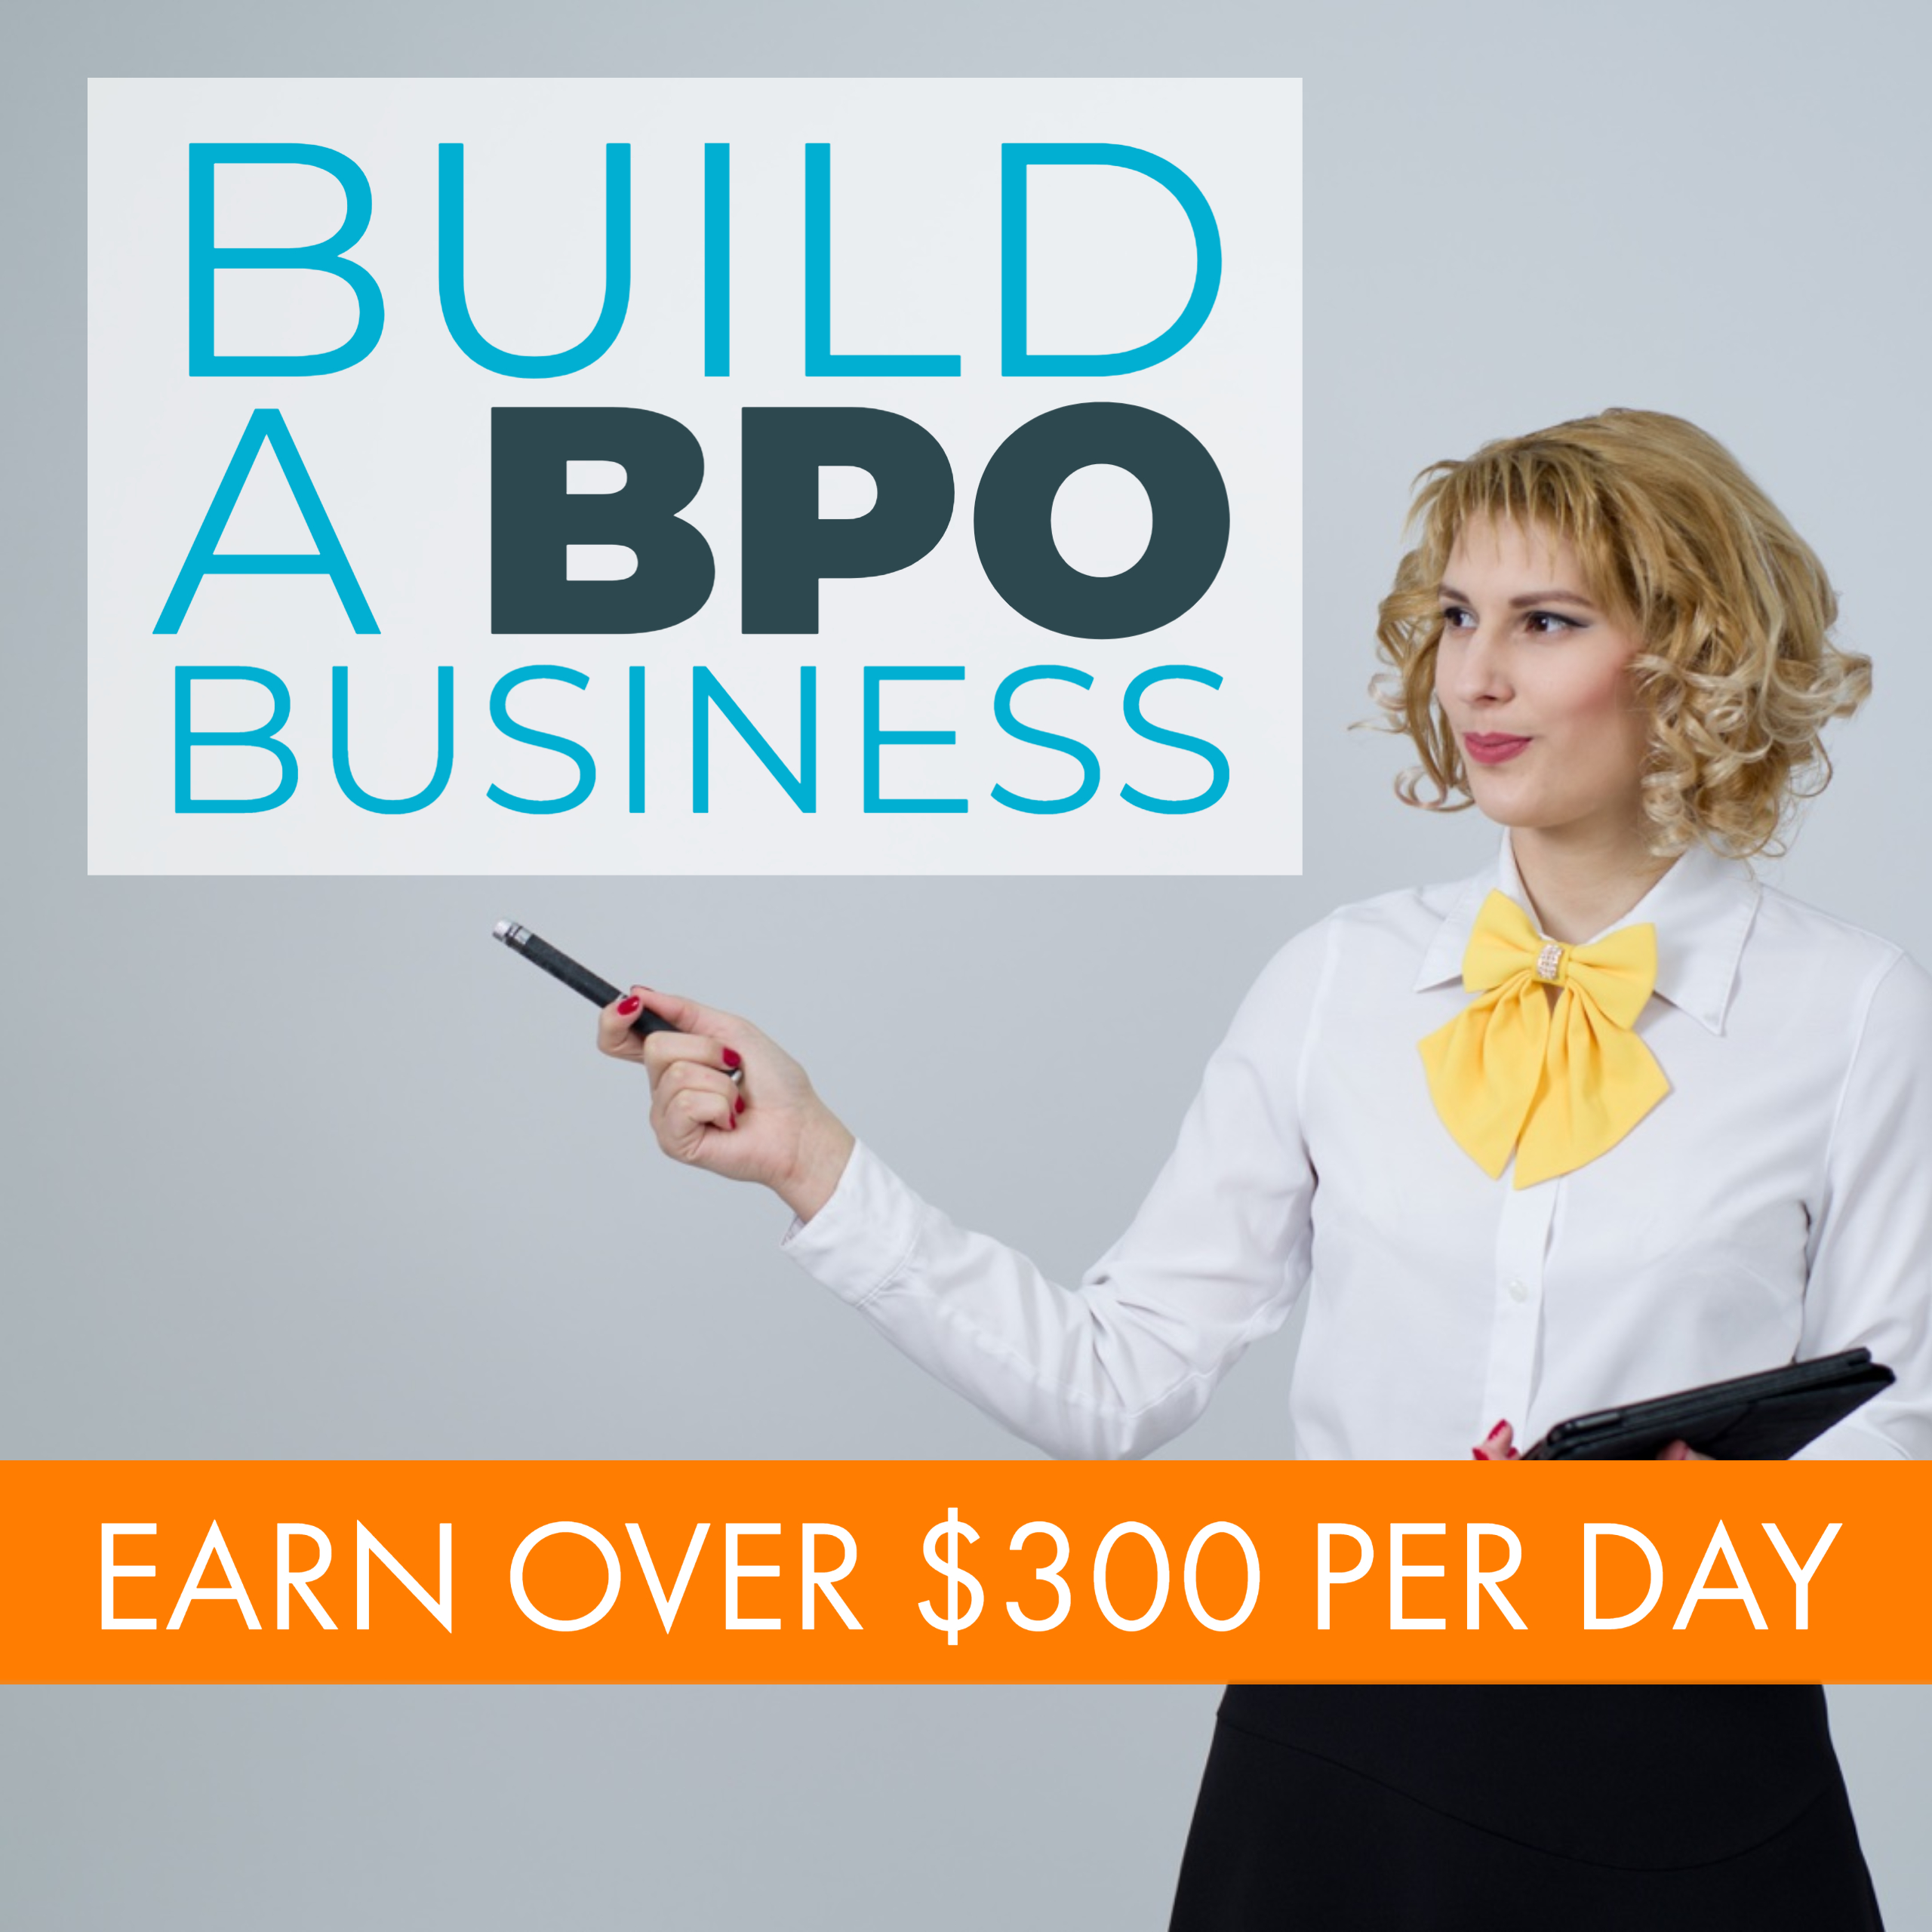 How To Build a BPO Business Brokers Price Opinion course how to do BPOs best real estate school